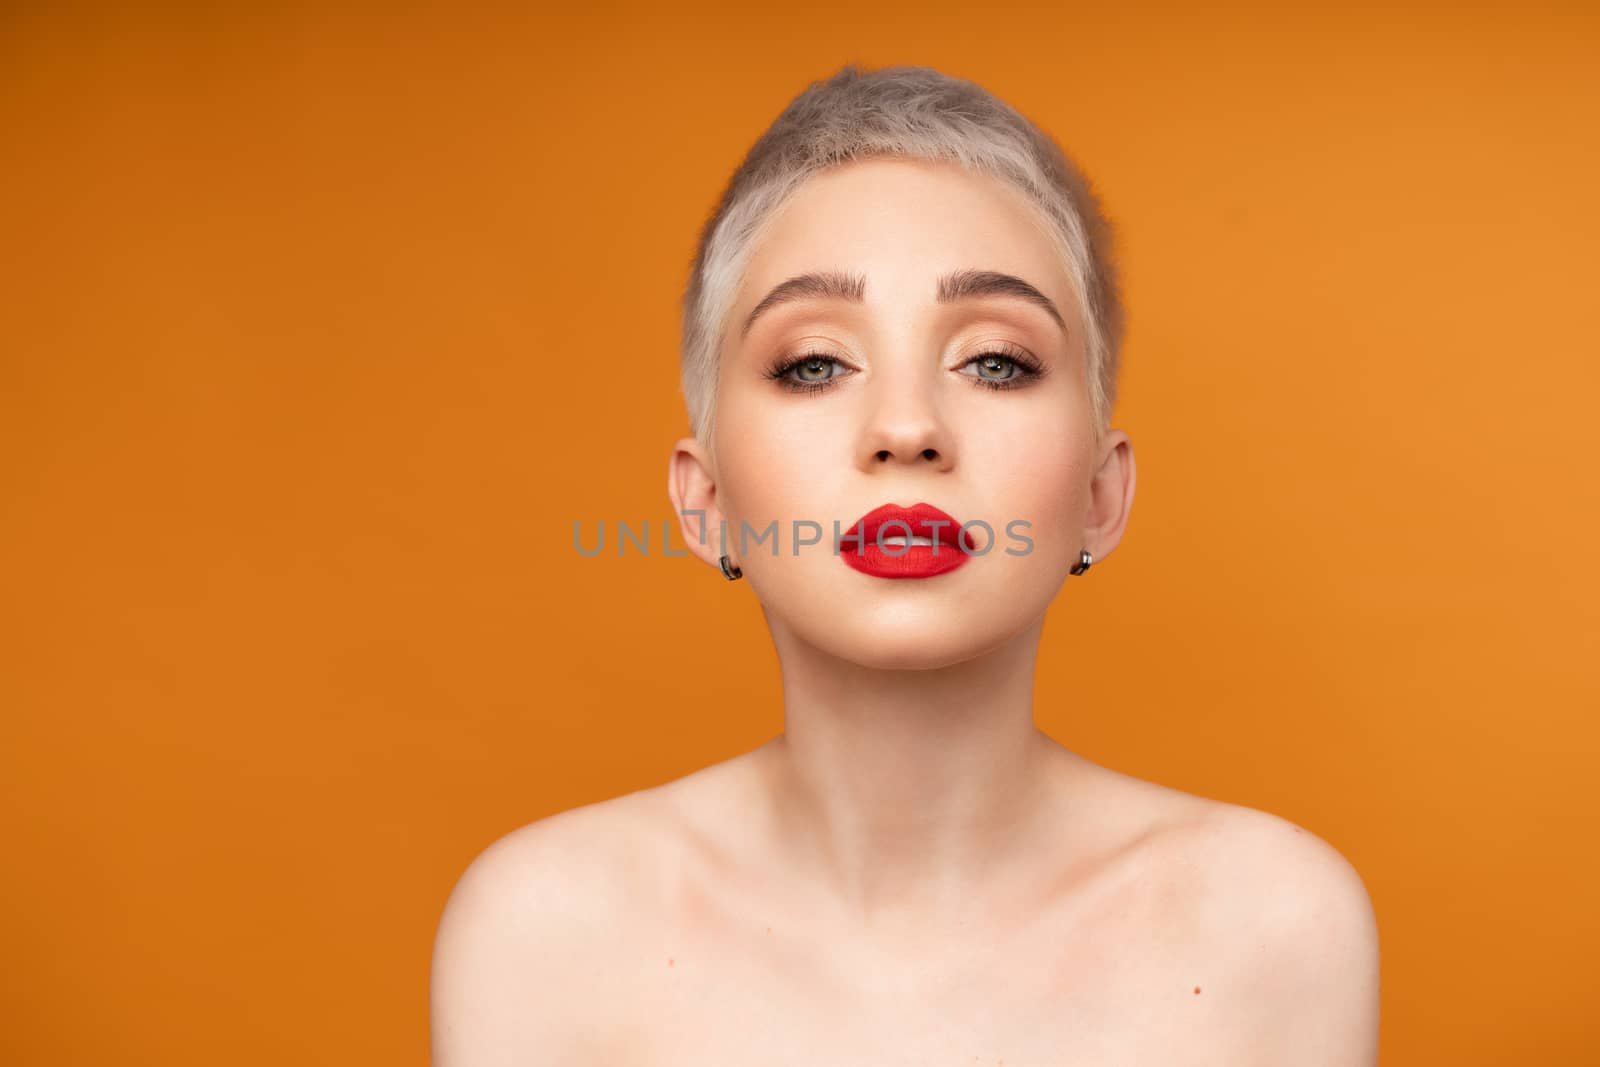 Close up fashion portrait woman with short hair red lips and naked shoulders on the colored orange background.